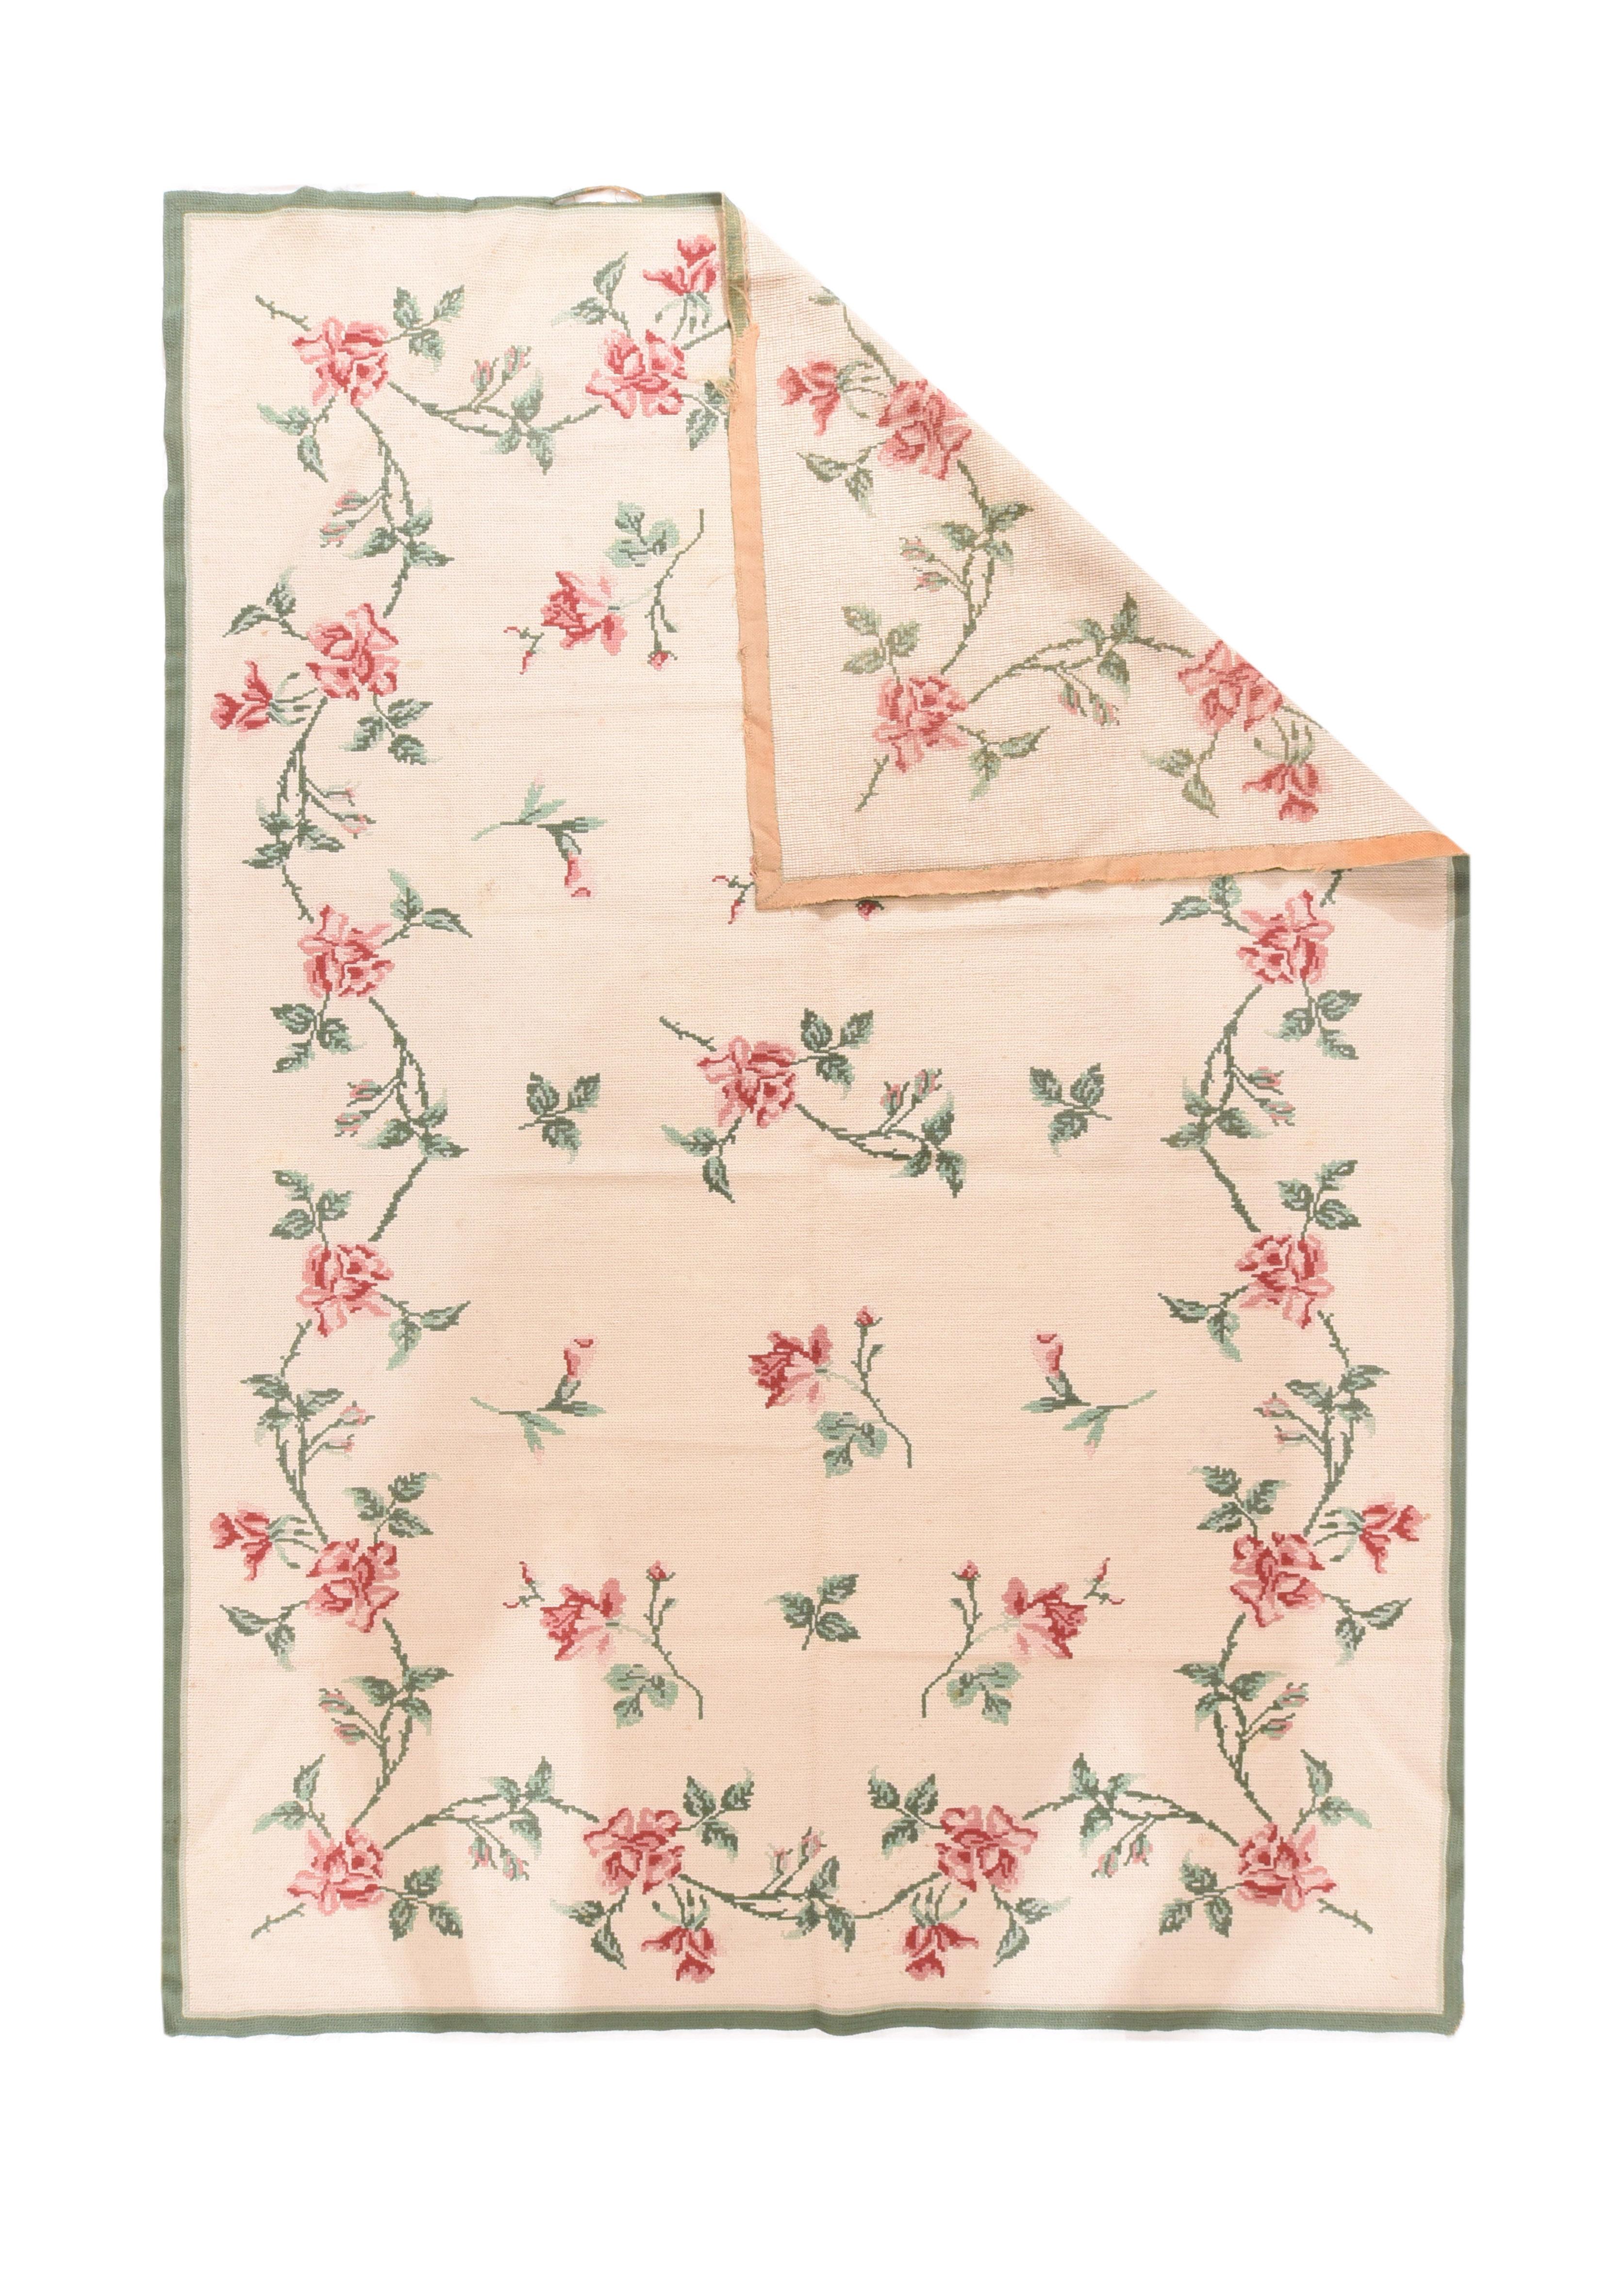 Vintage Needle point rug 8.9'' x 9.10''. The sandy-straw field shows an open pattern of drifting rose stems, within an undulating en suite rose, and leaf thorny meander, all accented in pinks. Narrow plain border. Good condition with ends that need